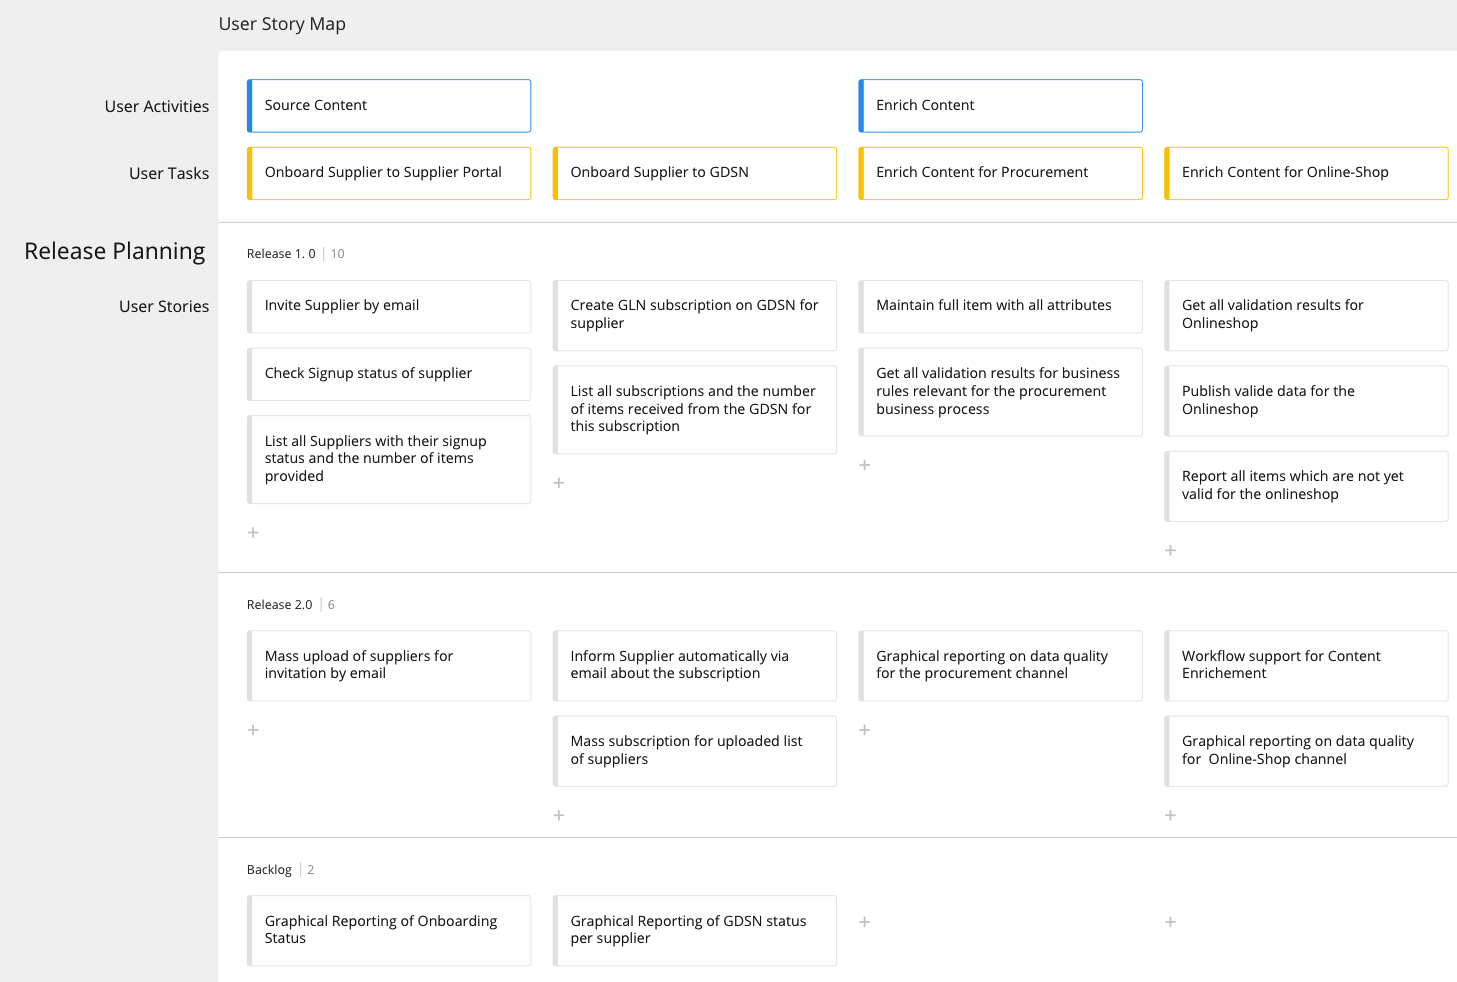 Implementierung Story Map